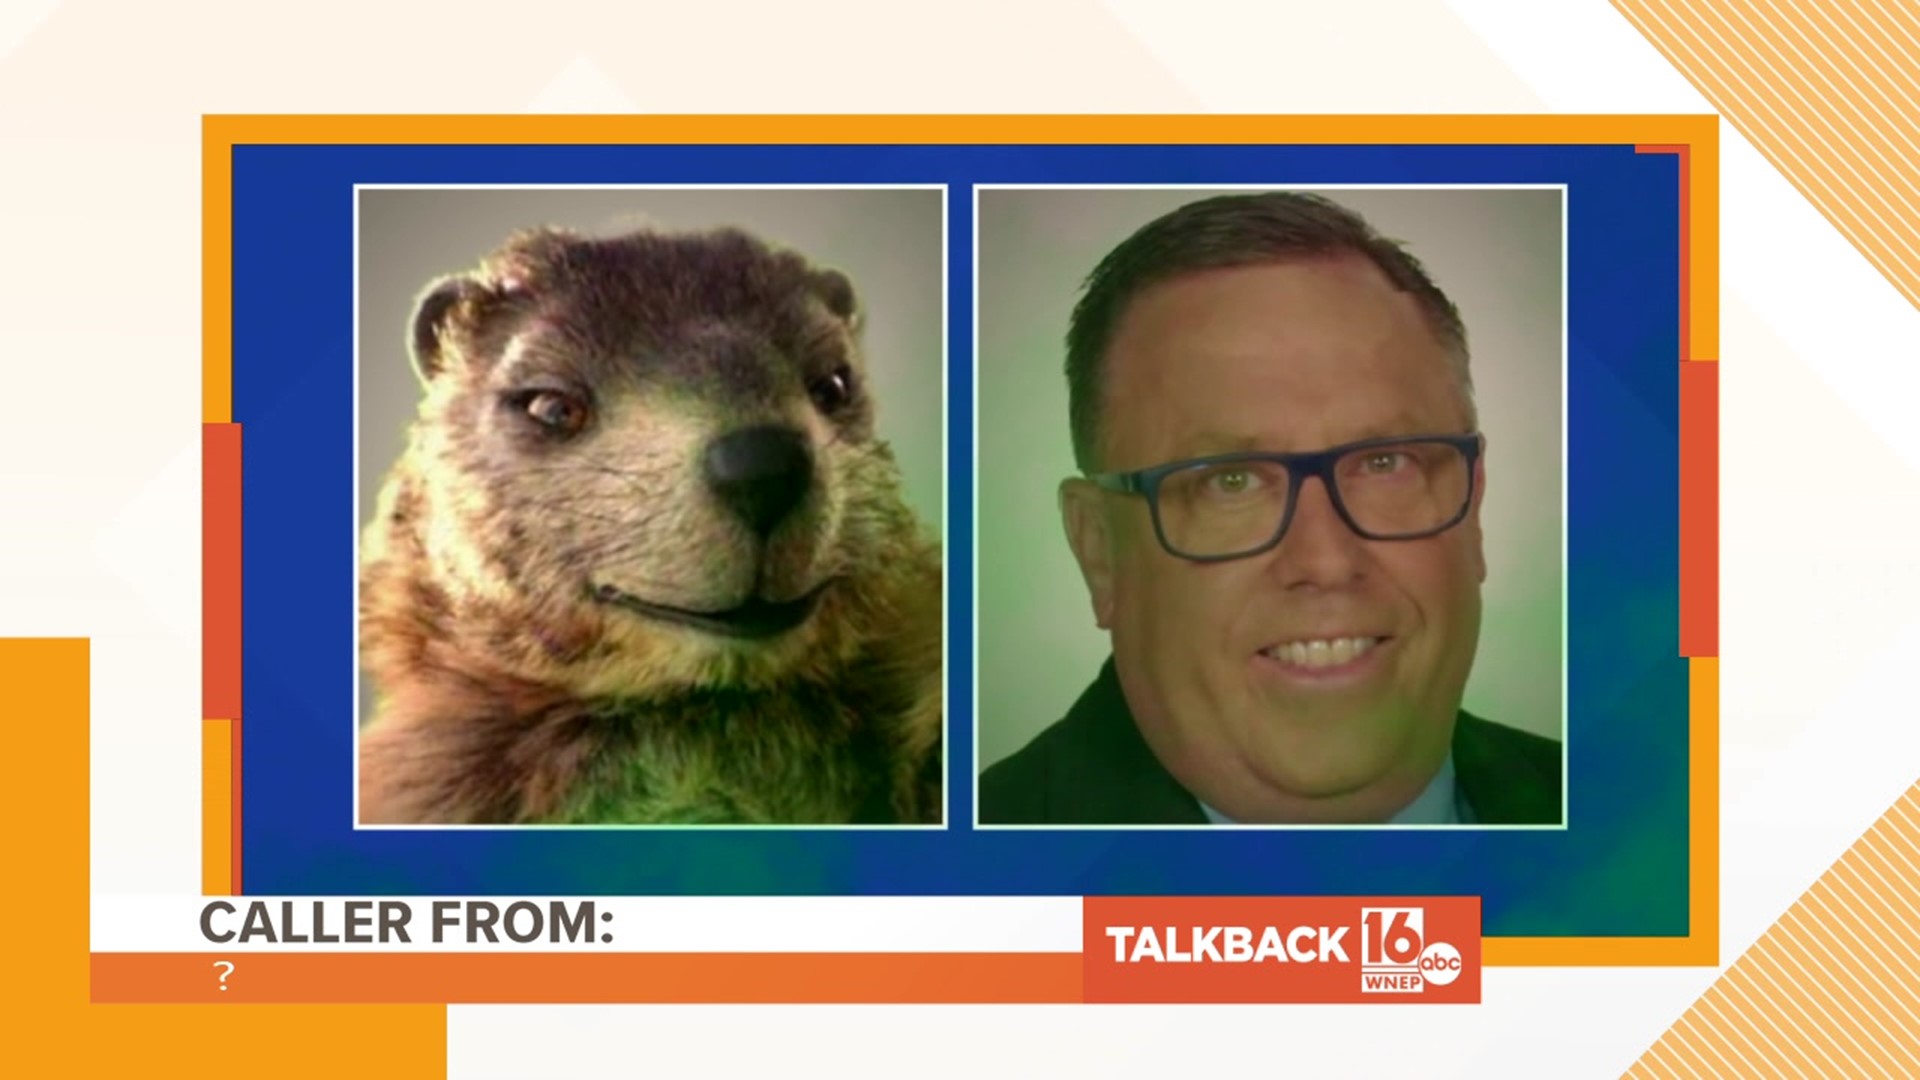 It all started when a caller compared Steve Lloyd to Gus the Groundhog.